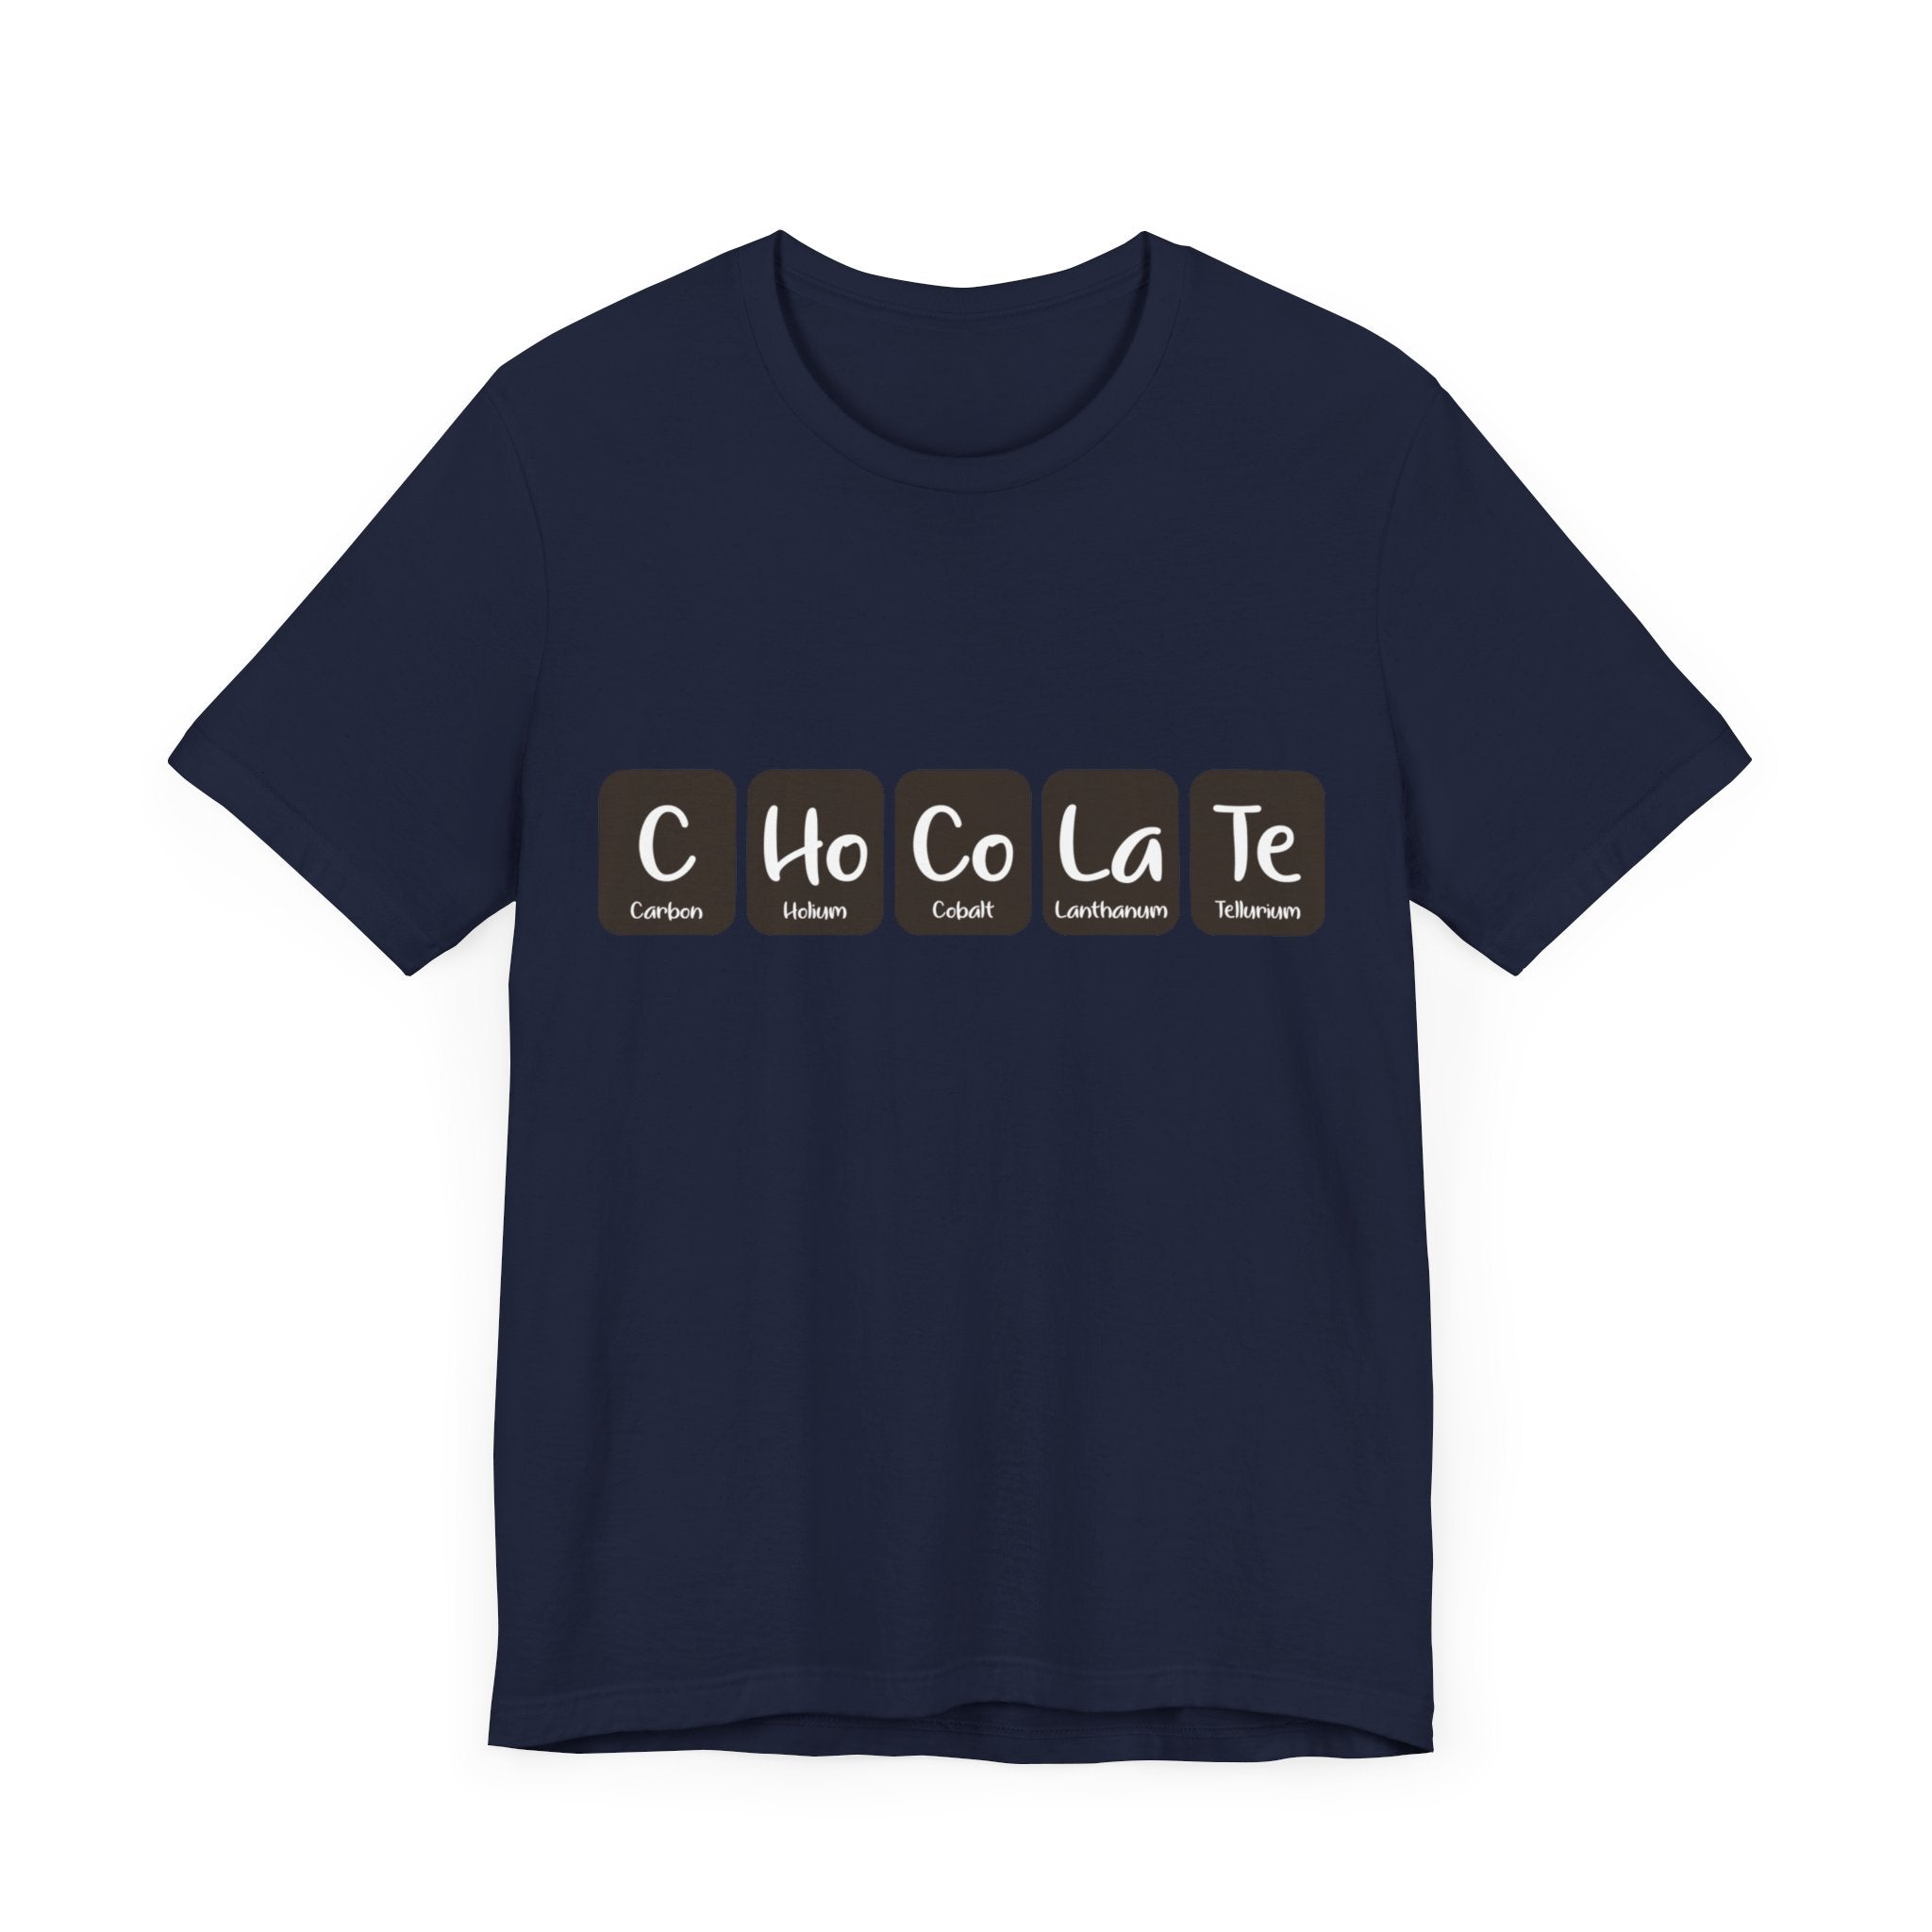 A C-Ho-Co-La-Te - T-Shirt made of 100% Airlume cotton featuring a fashionable C-Ho-Co-La-Te design, with stylized periodic table elements spelling out "CHoCoLaTe" in white letters on brown squares.